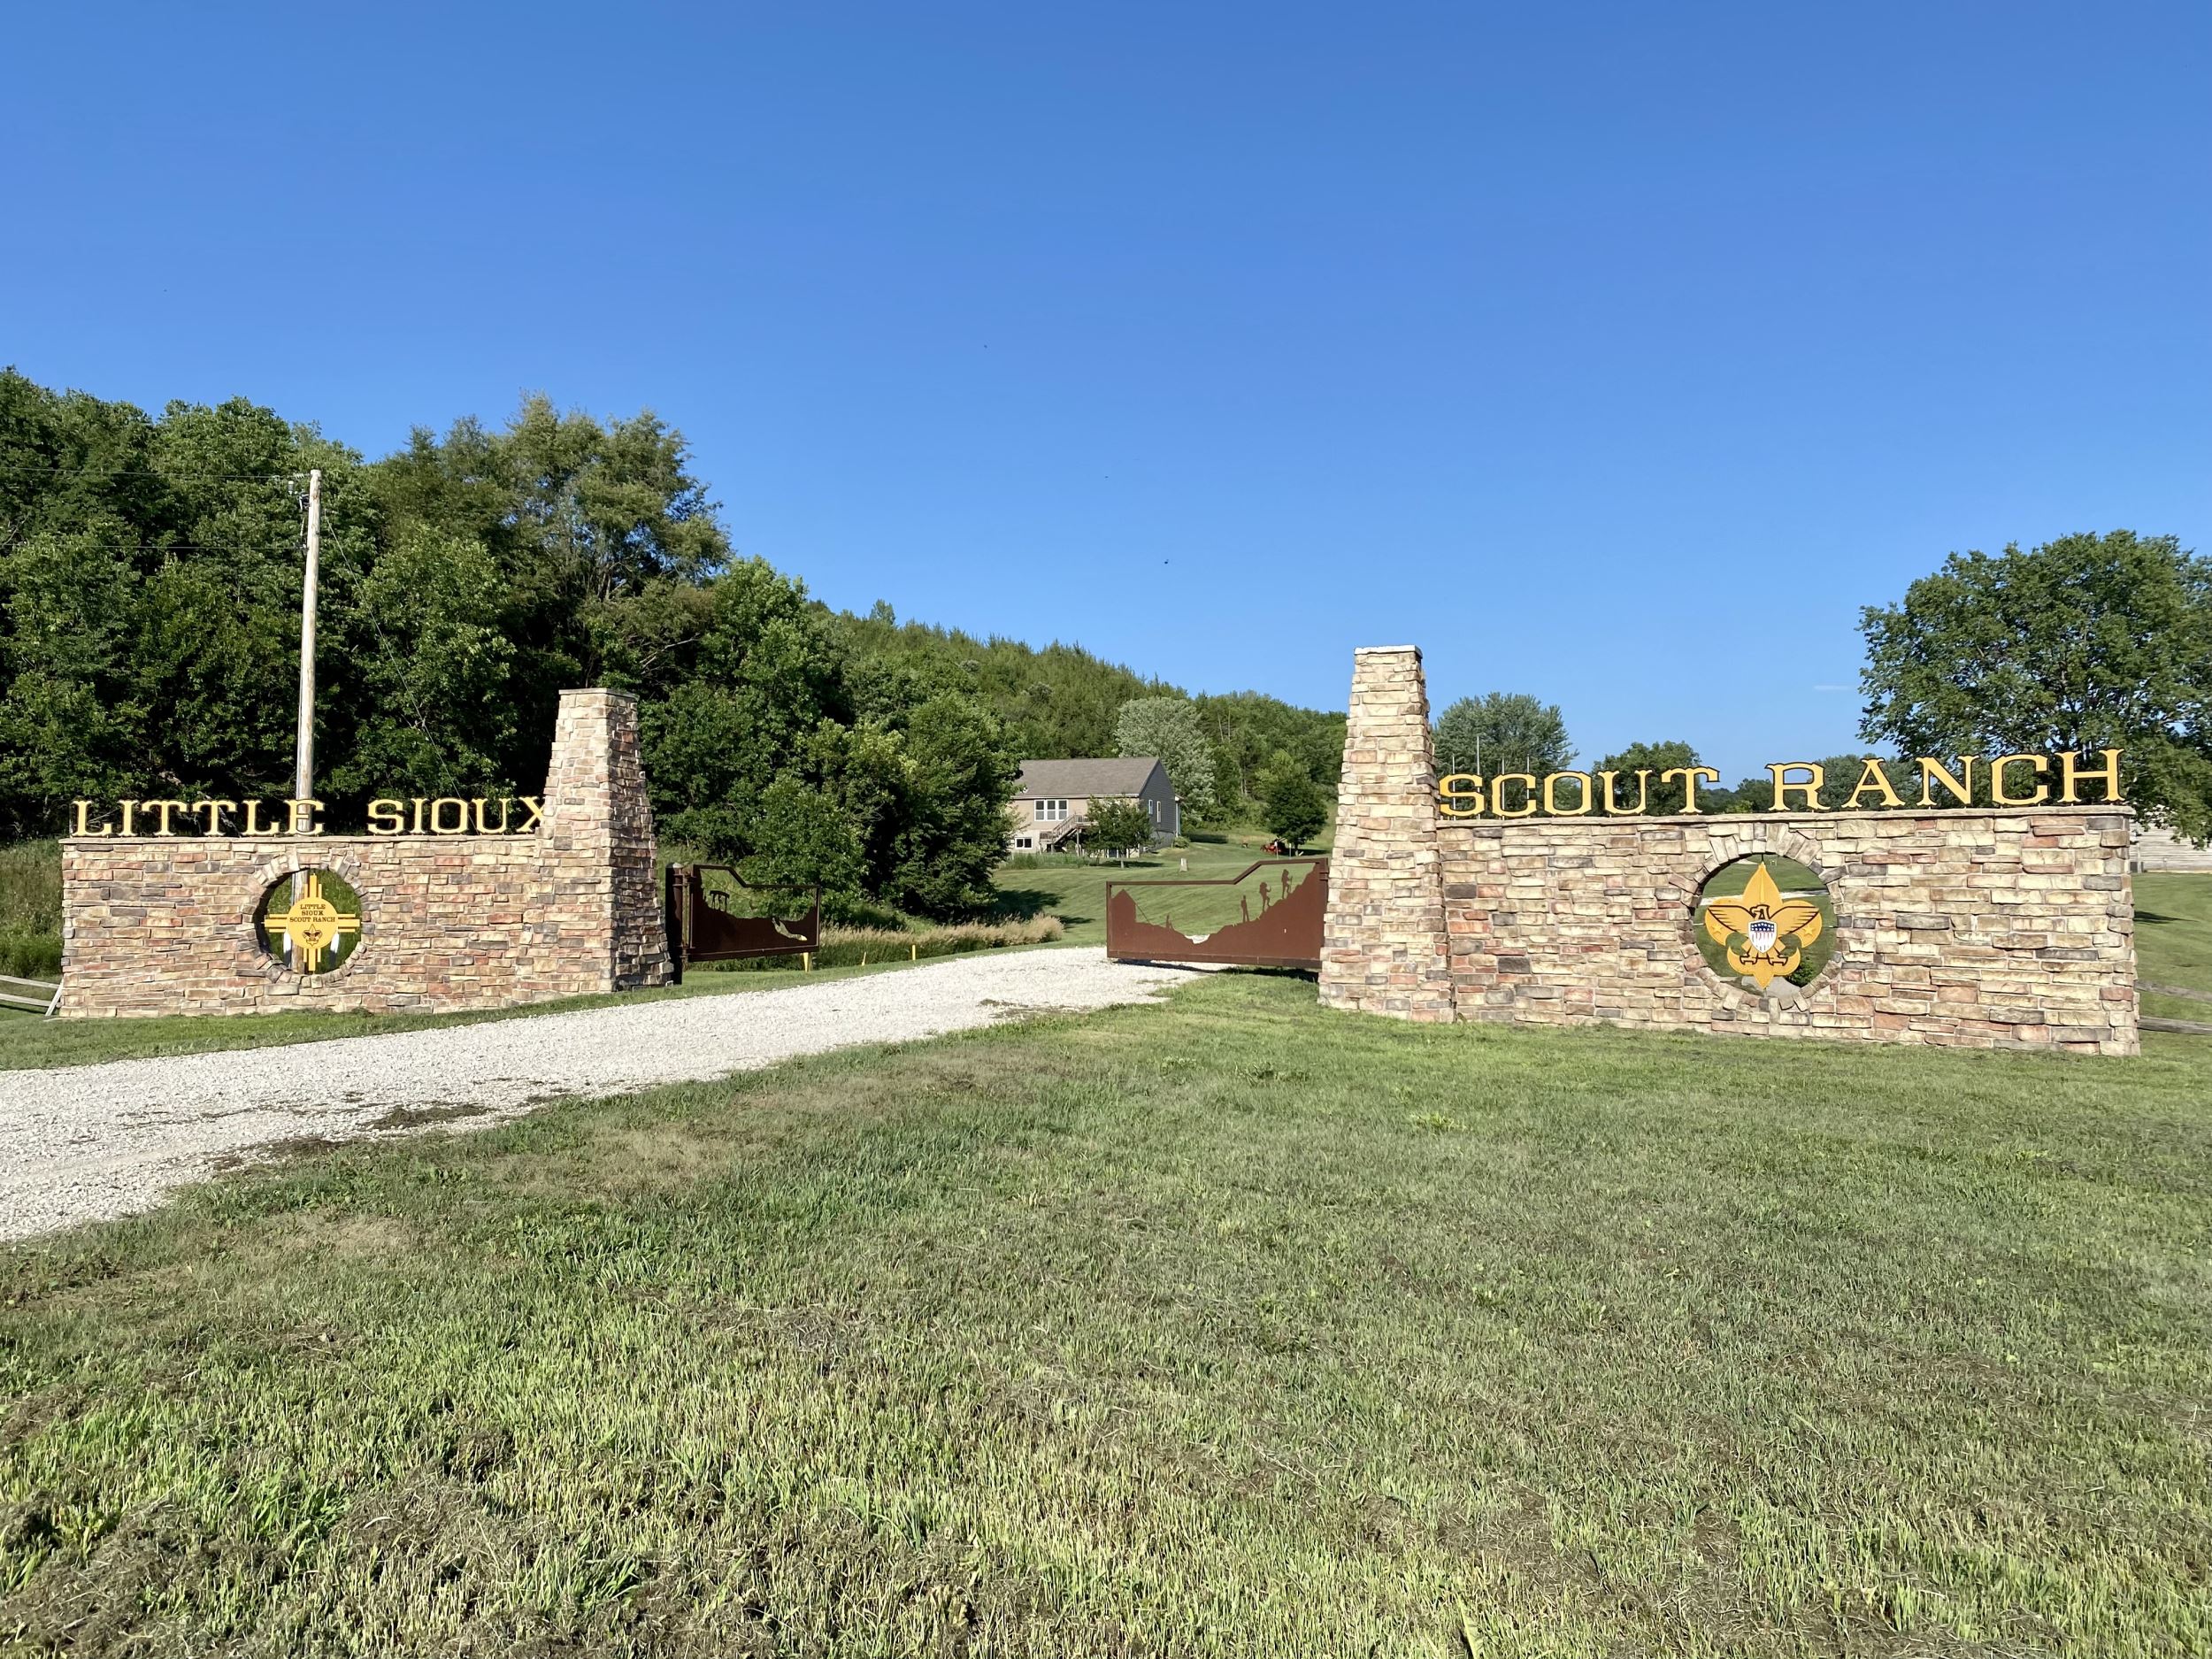 Iowa Natural Heritage Foundation purchases Little Sioux Scout Ranch